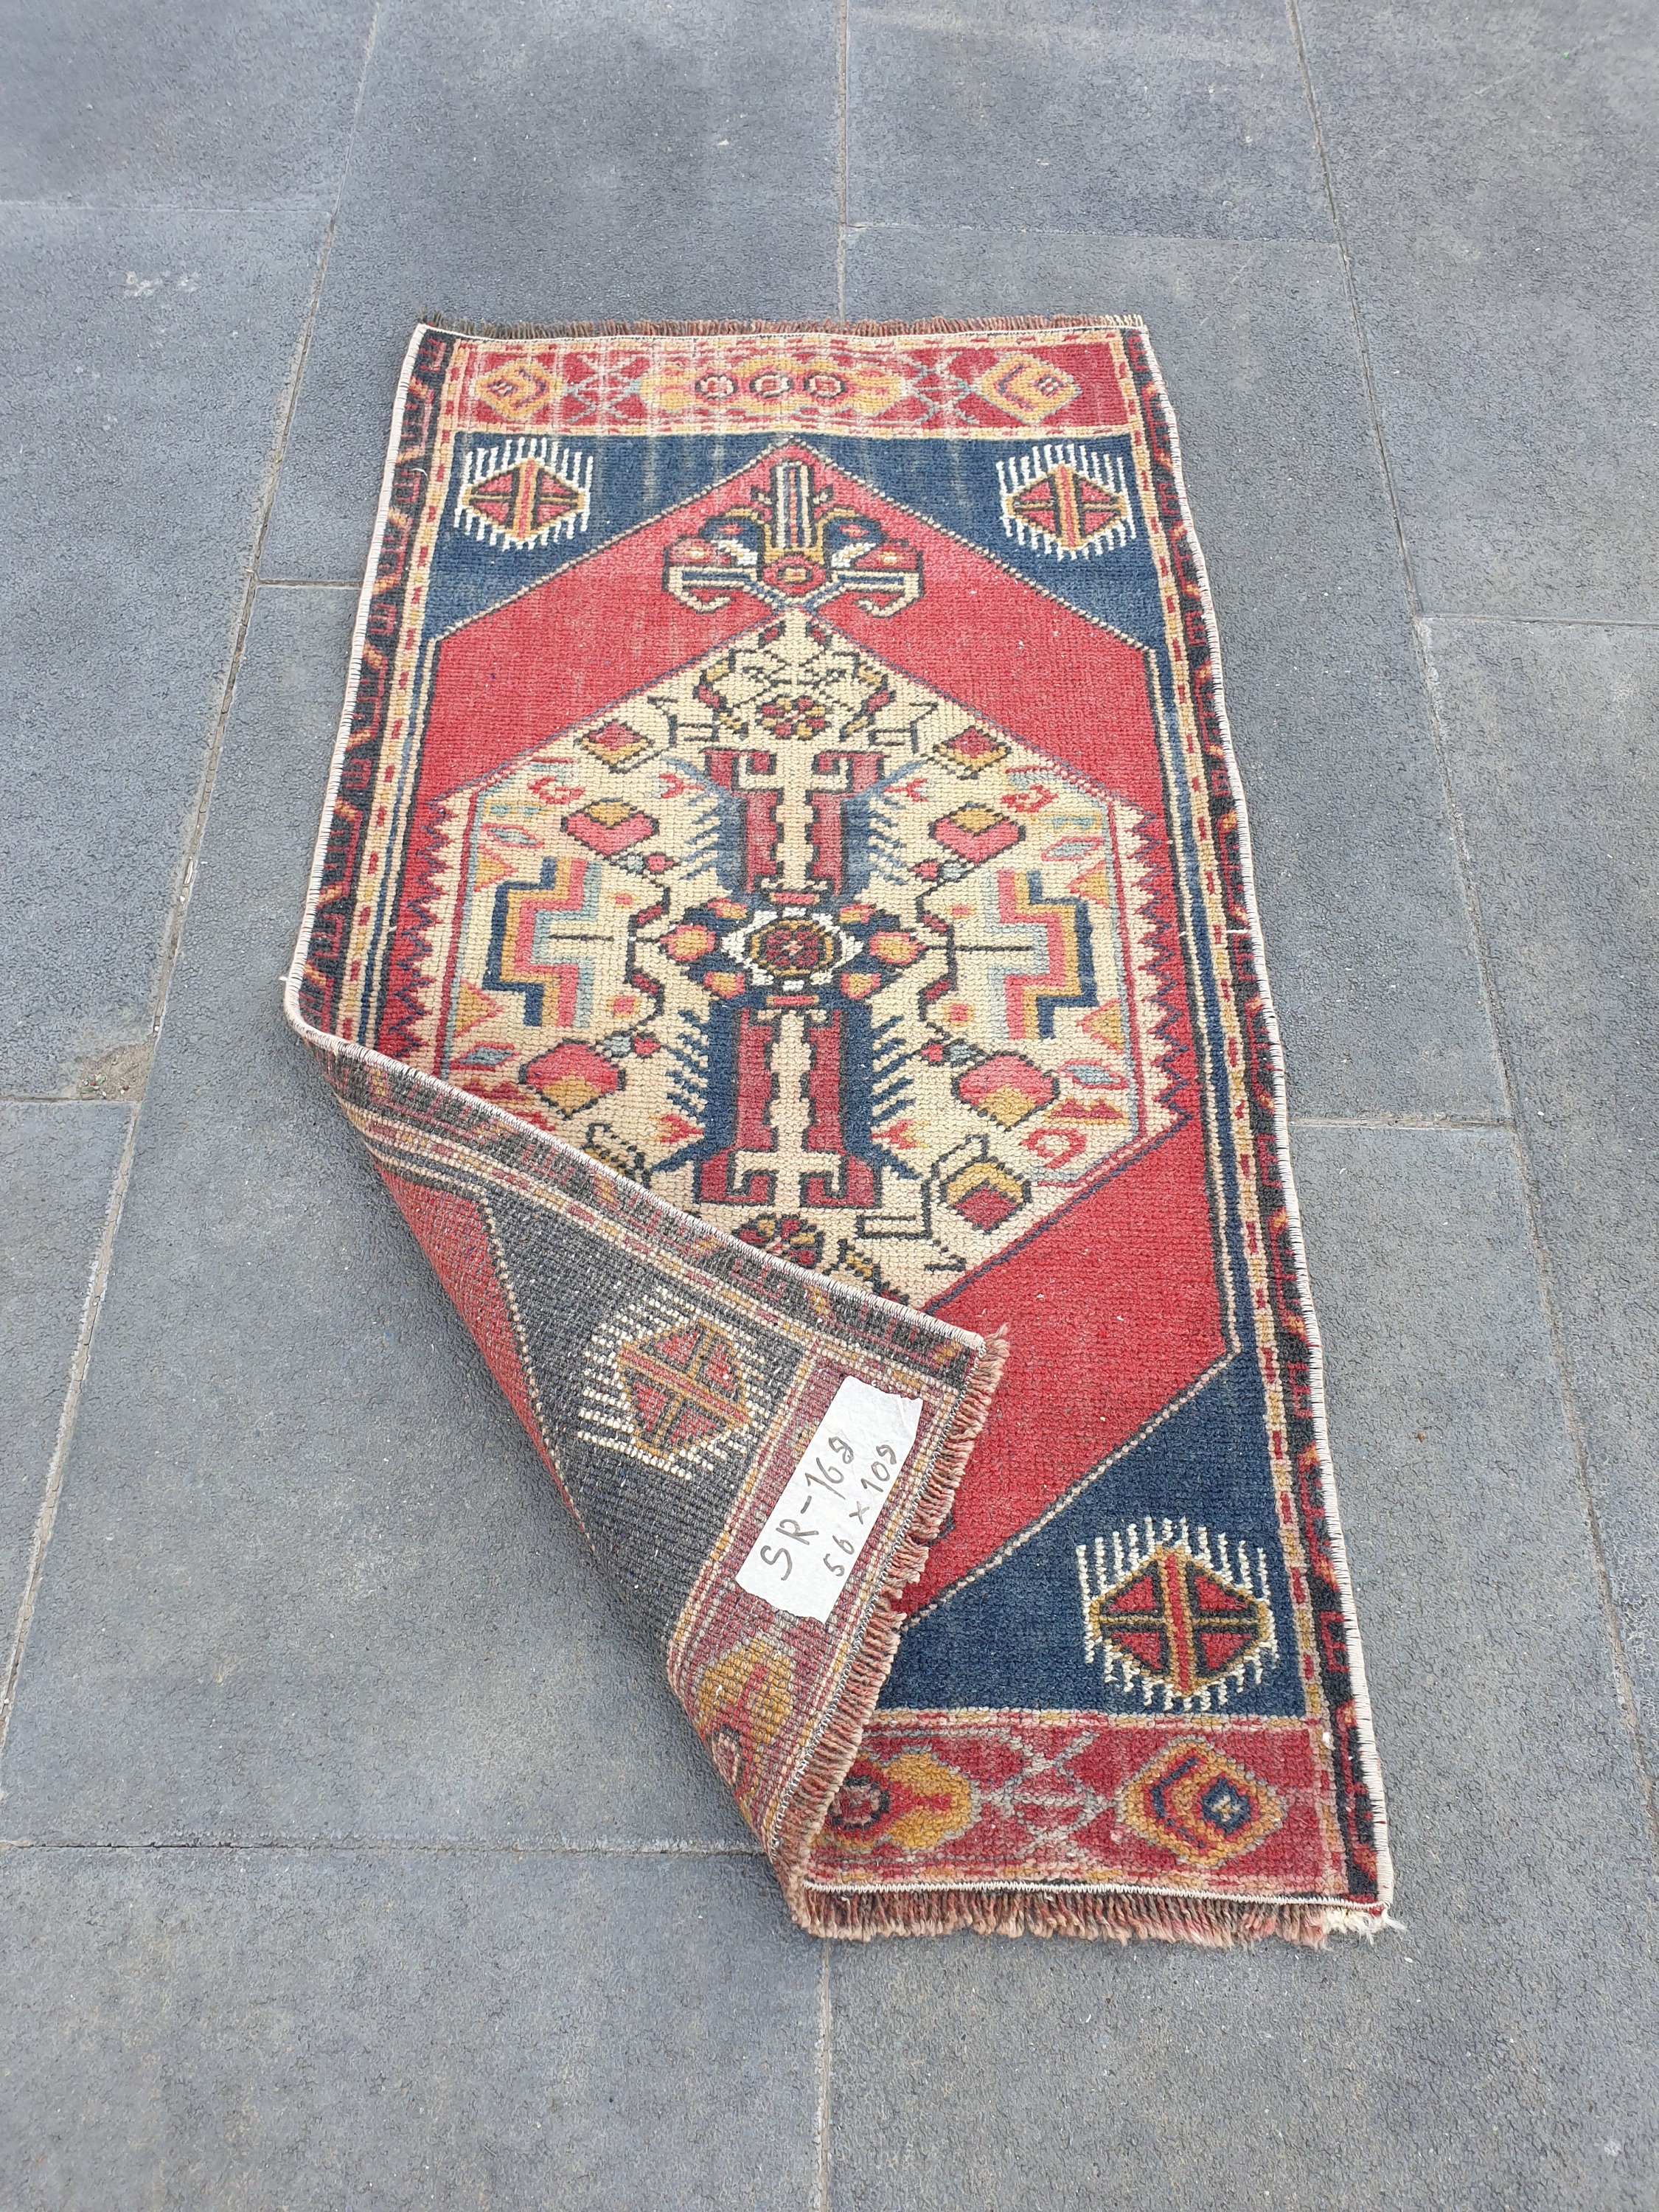 Small Handmade Rug 1.6 x 3.7 ft Small Vintage Rug Small Red Rug Small Oriental Rug Blue Door Mat Small Entry Rug Small Turkish Rug